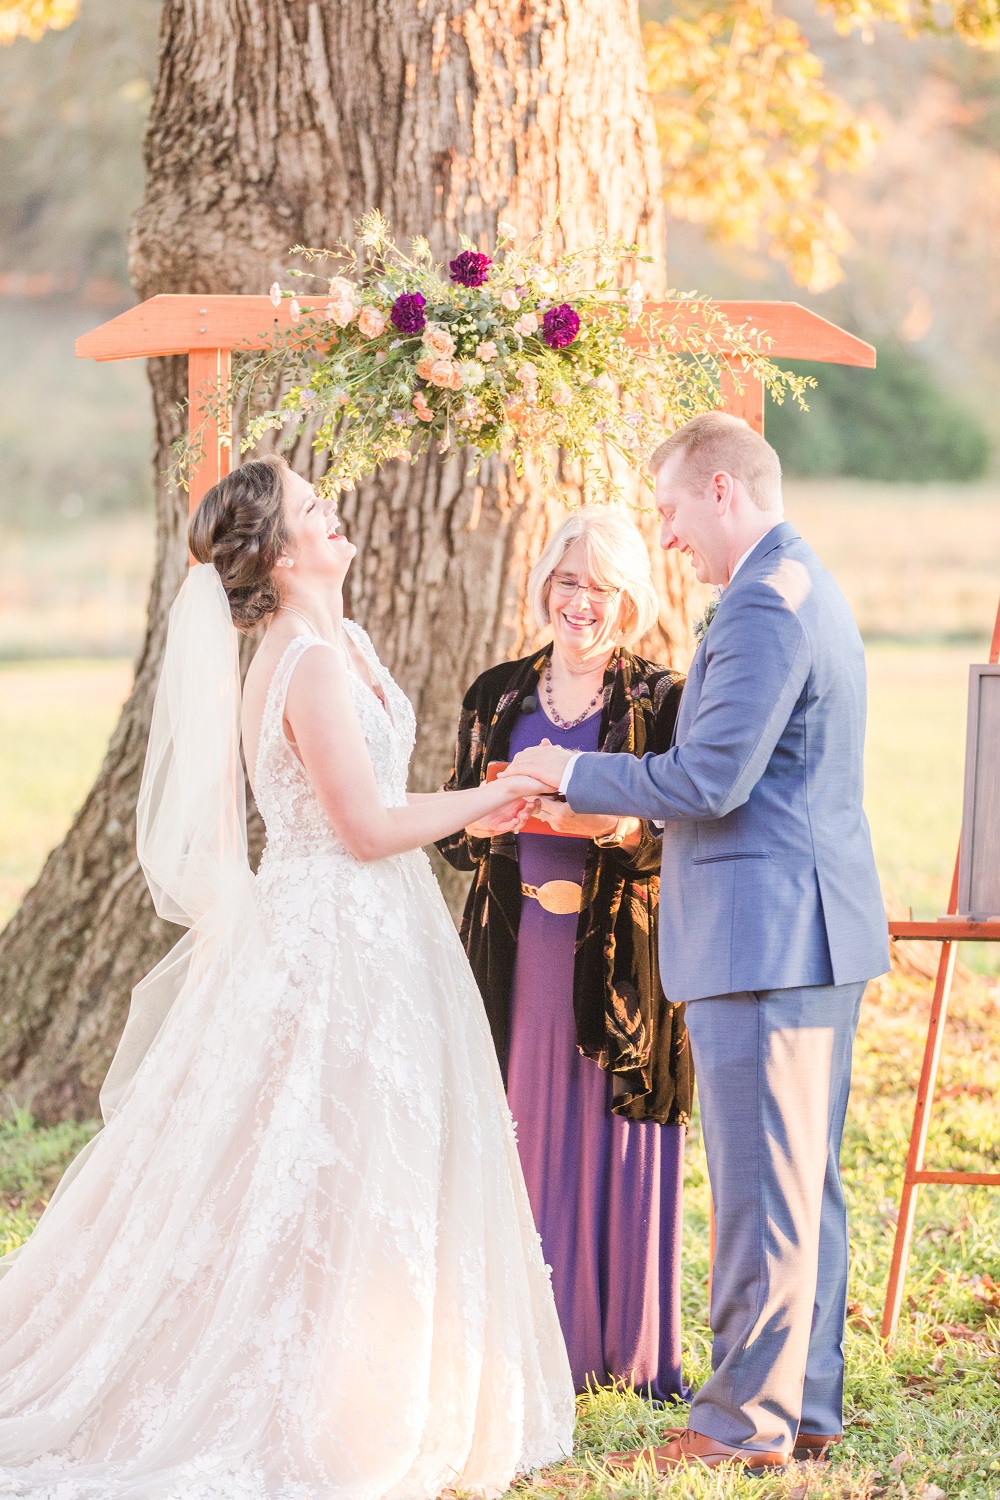 Bride in v neck lace wedding dress laughs while holding groom with blue suit under Purple, coral and white blooms with greenery pulled together in a beautiful wedding ceremony floral design created by durham florist poppy belle floral design